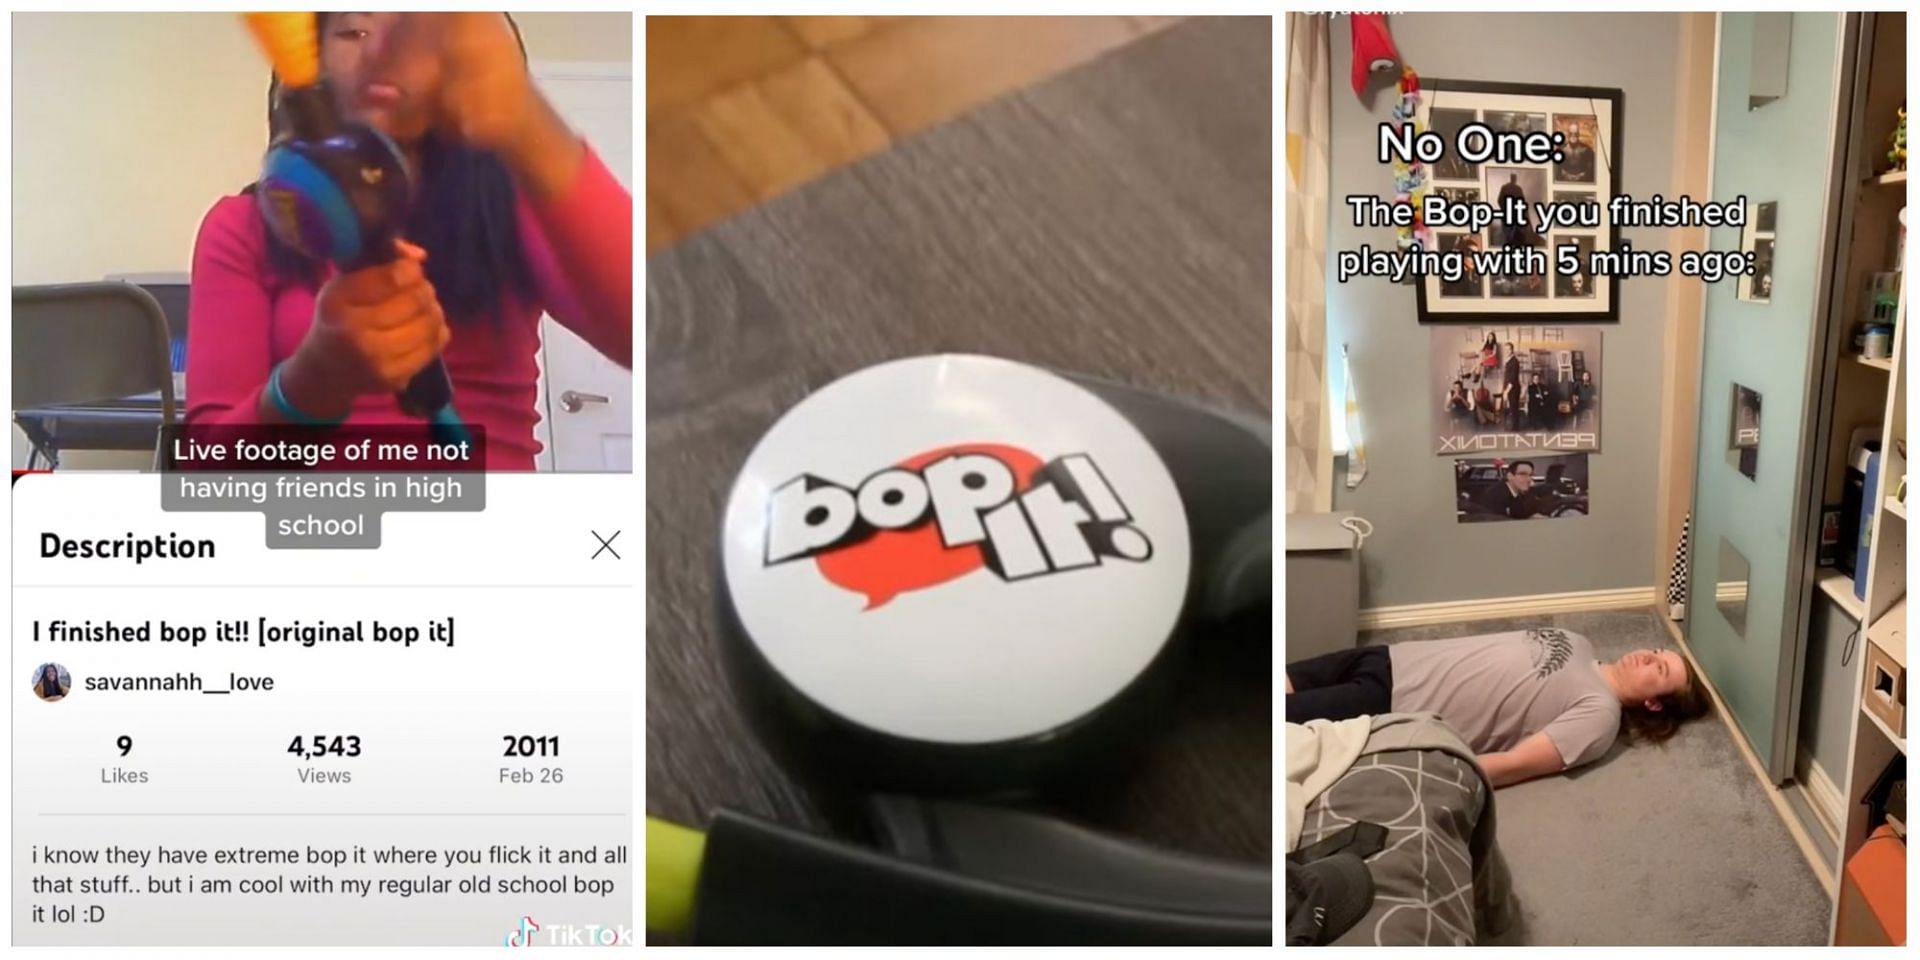 Details about the Bop It Twist It Pull It trend explored as the challenge goes viral on TikTok. (Image via TikTok)